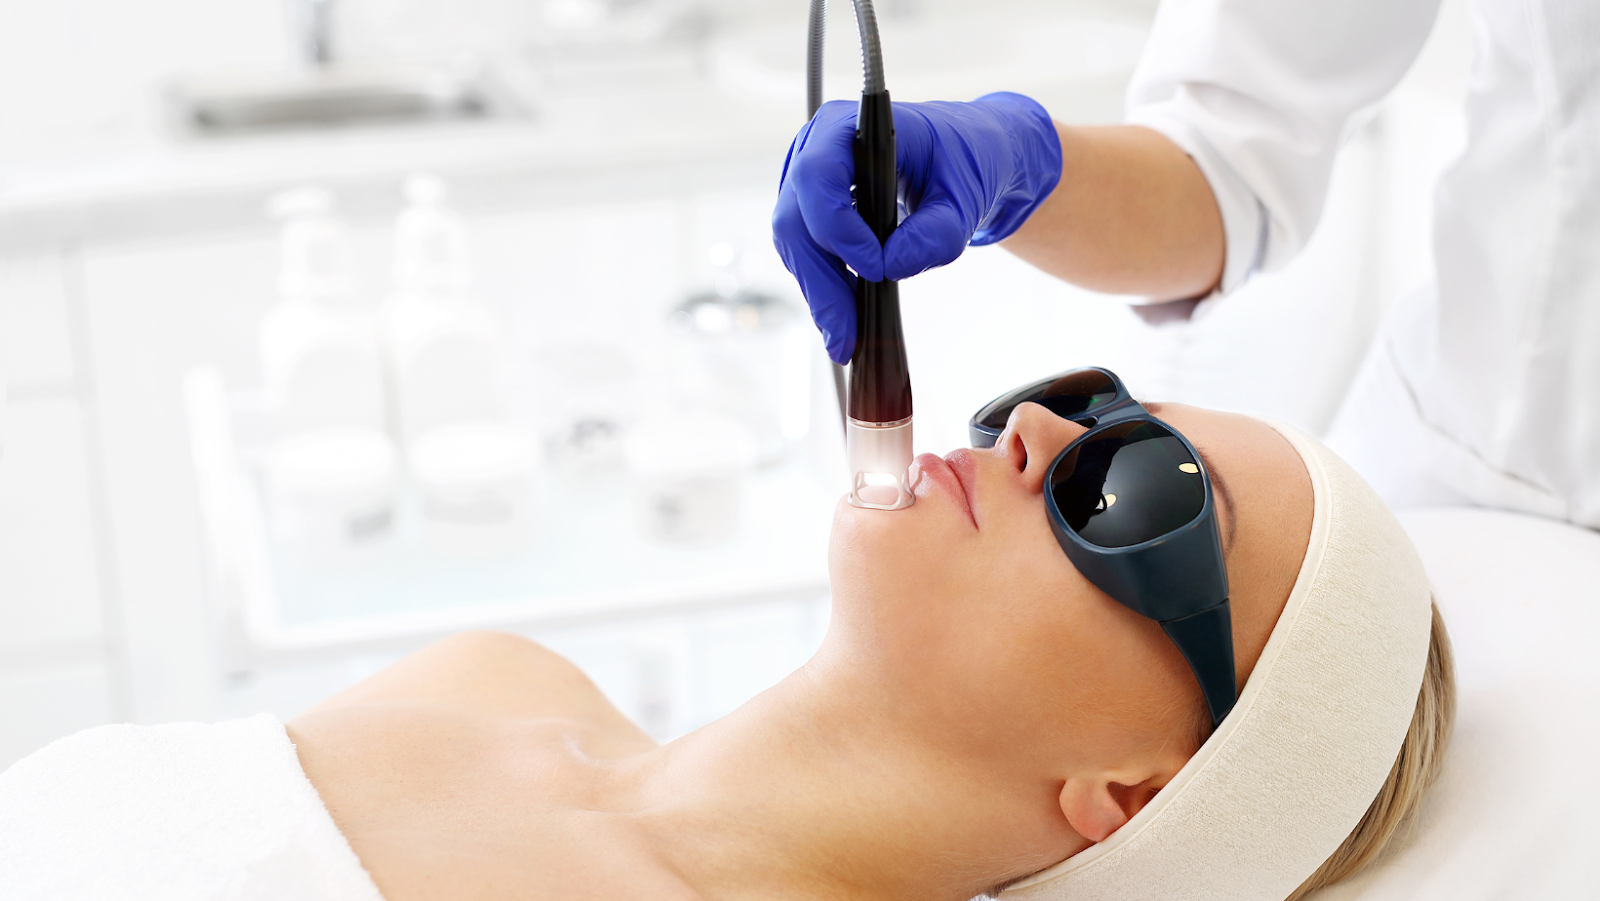 The Many Benefits of Laser Skin Tightening